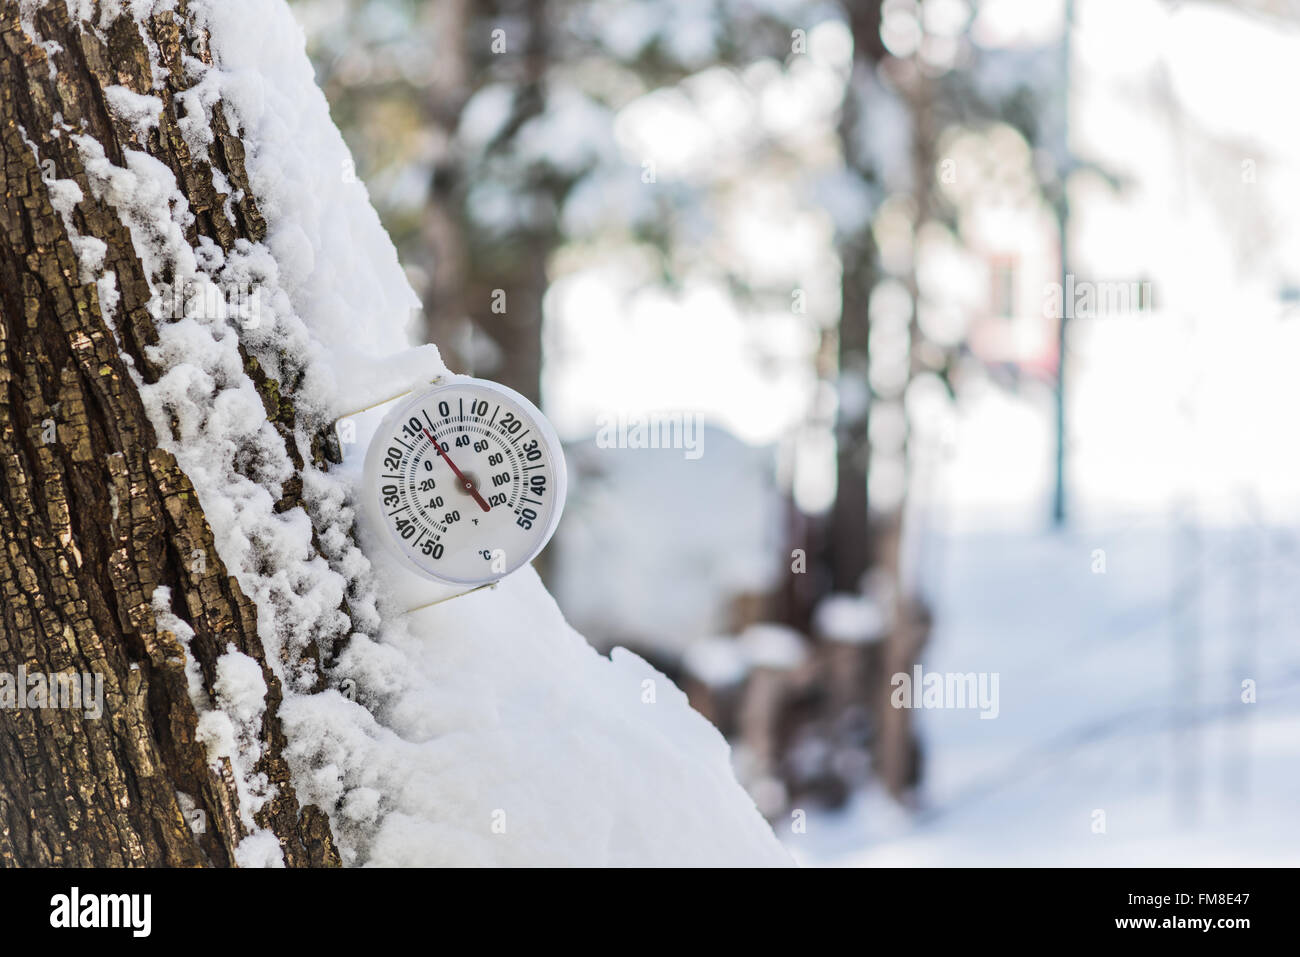 Springtime will come.  Round analogue thermometer mounted to a tree outside displays mild winter temperatures. Stock Photo